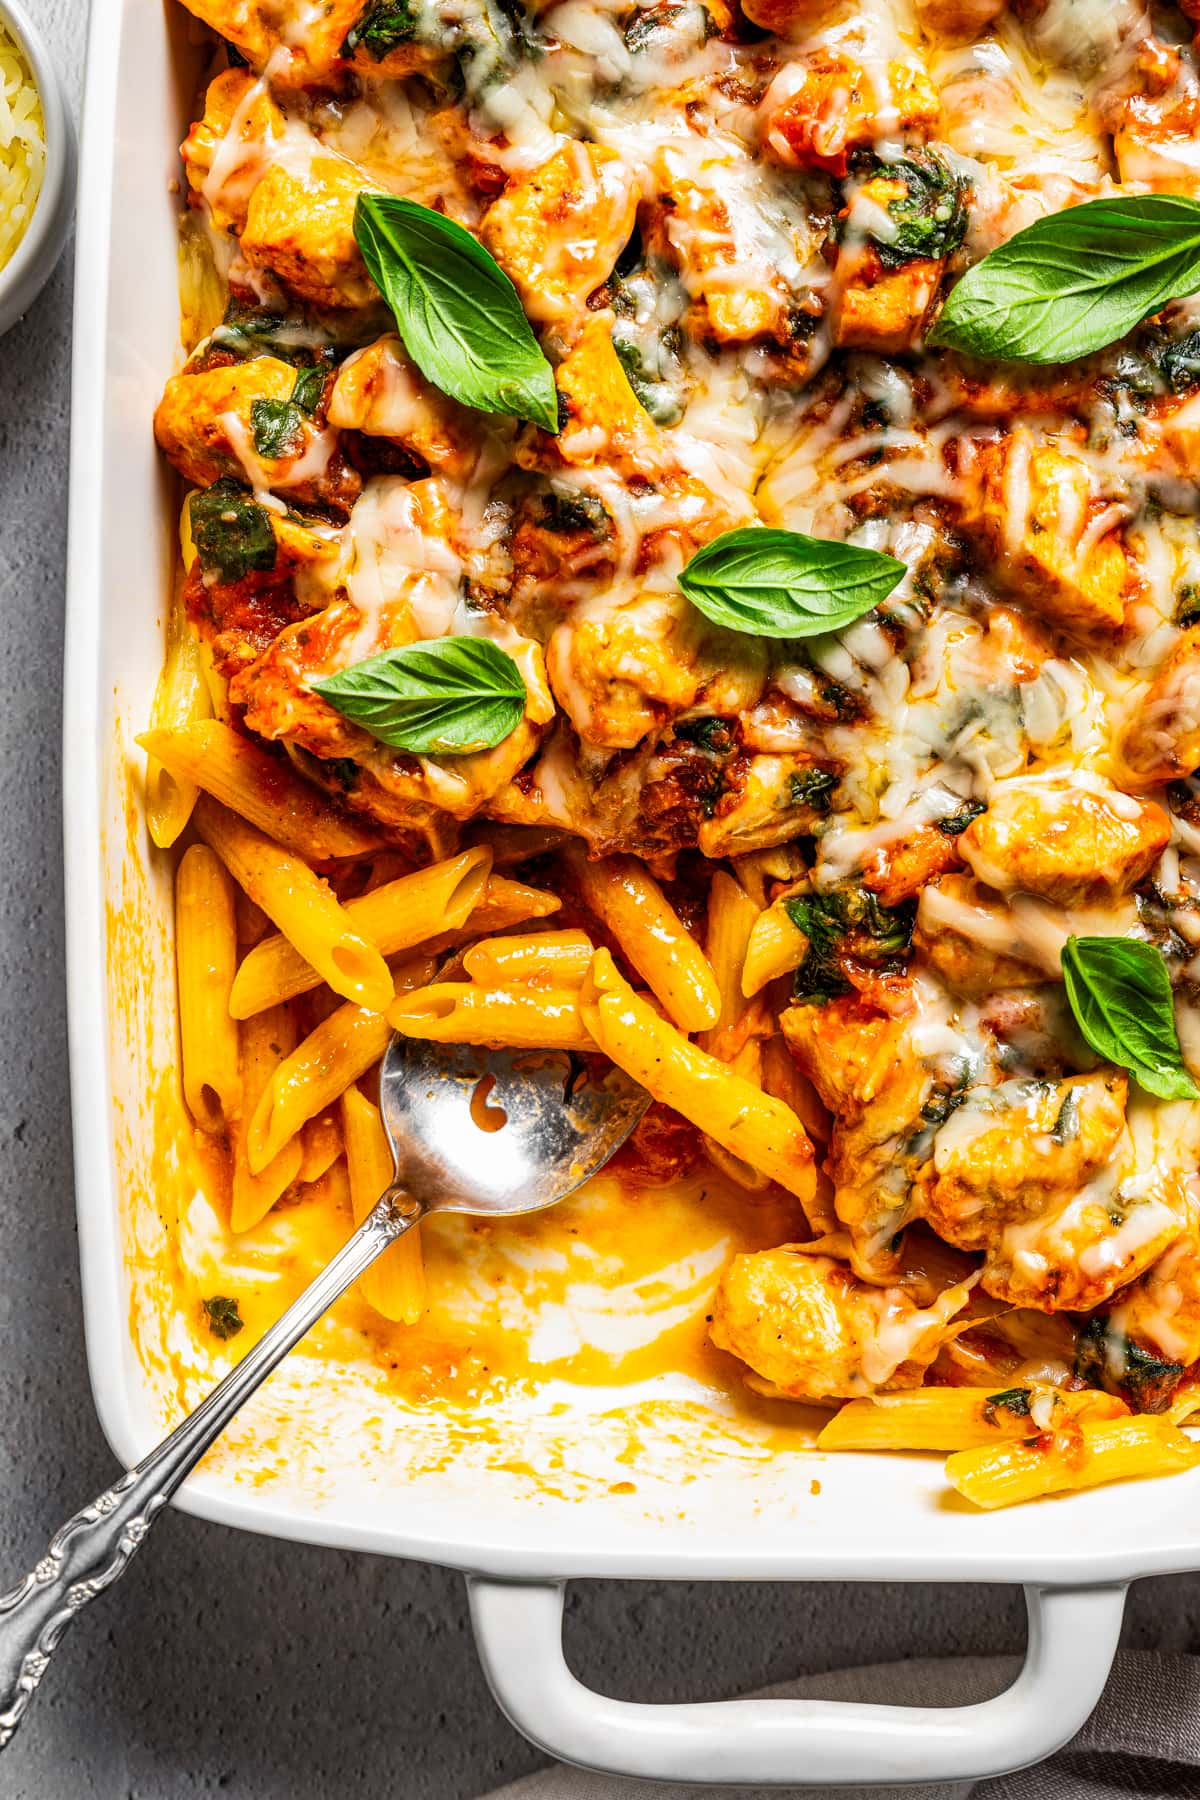 Overhead view of a chicken pasta bake in a casserole dish garnished with basil leaves, with a serving missing from the corner of the pan.